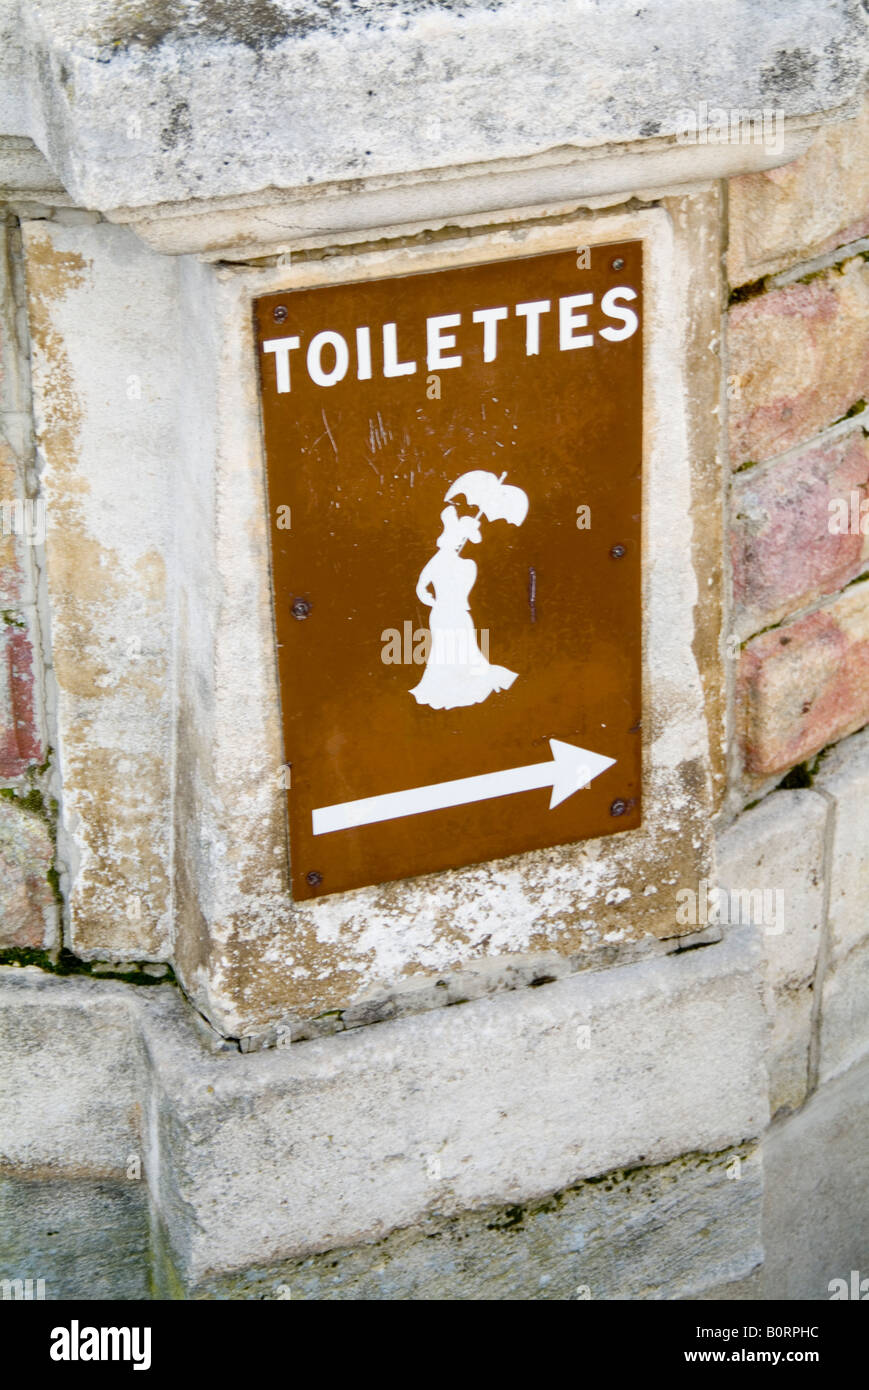 french toilet sign france women ladies wc water closet bog public Stock Photo